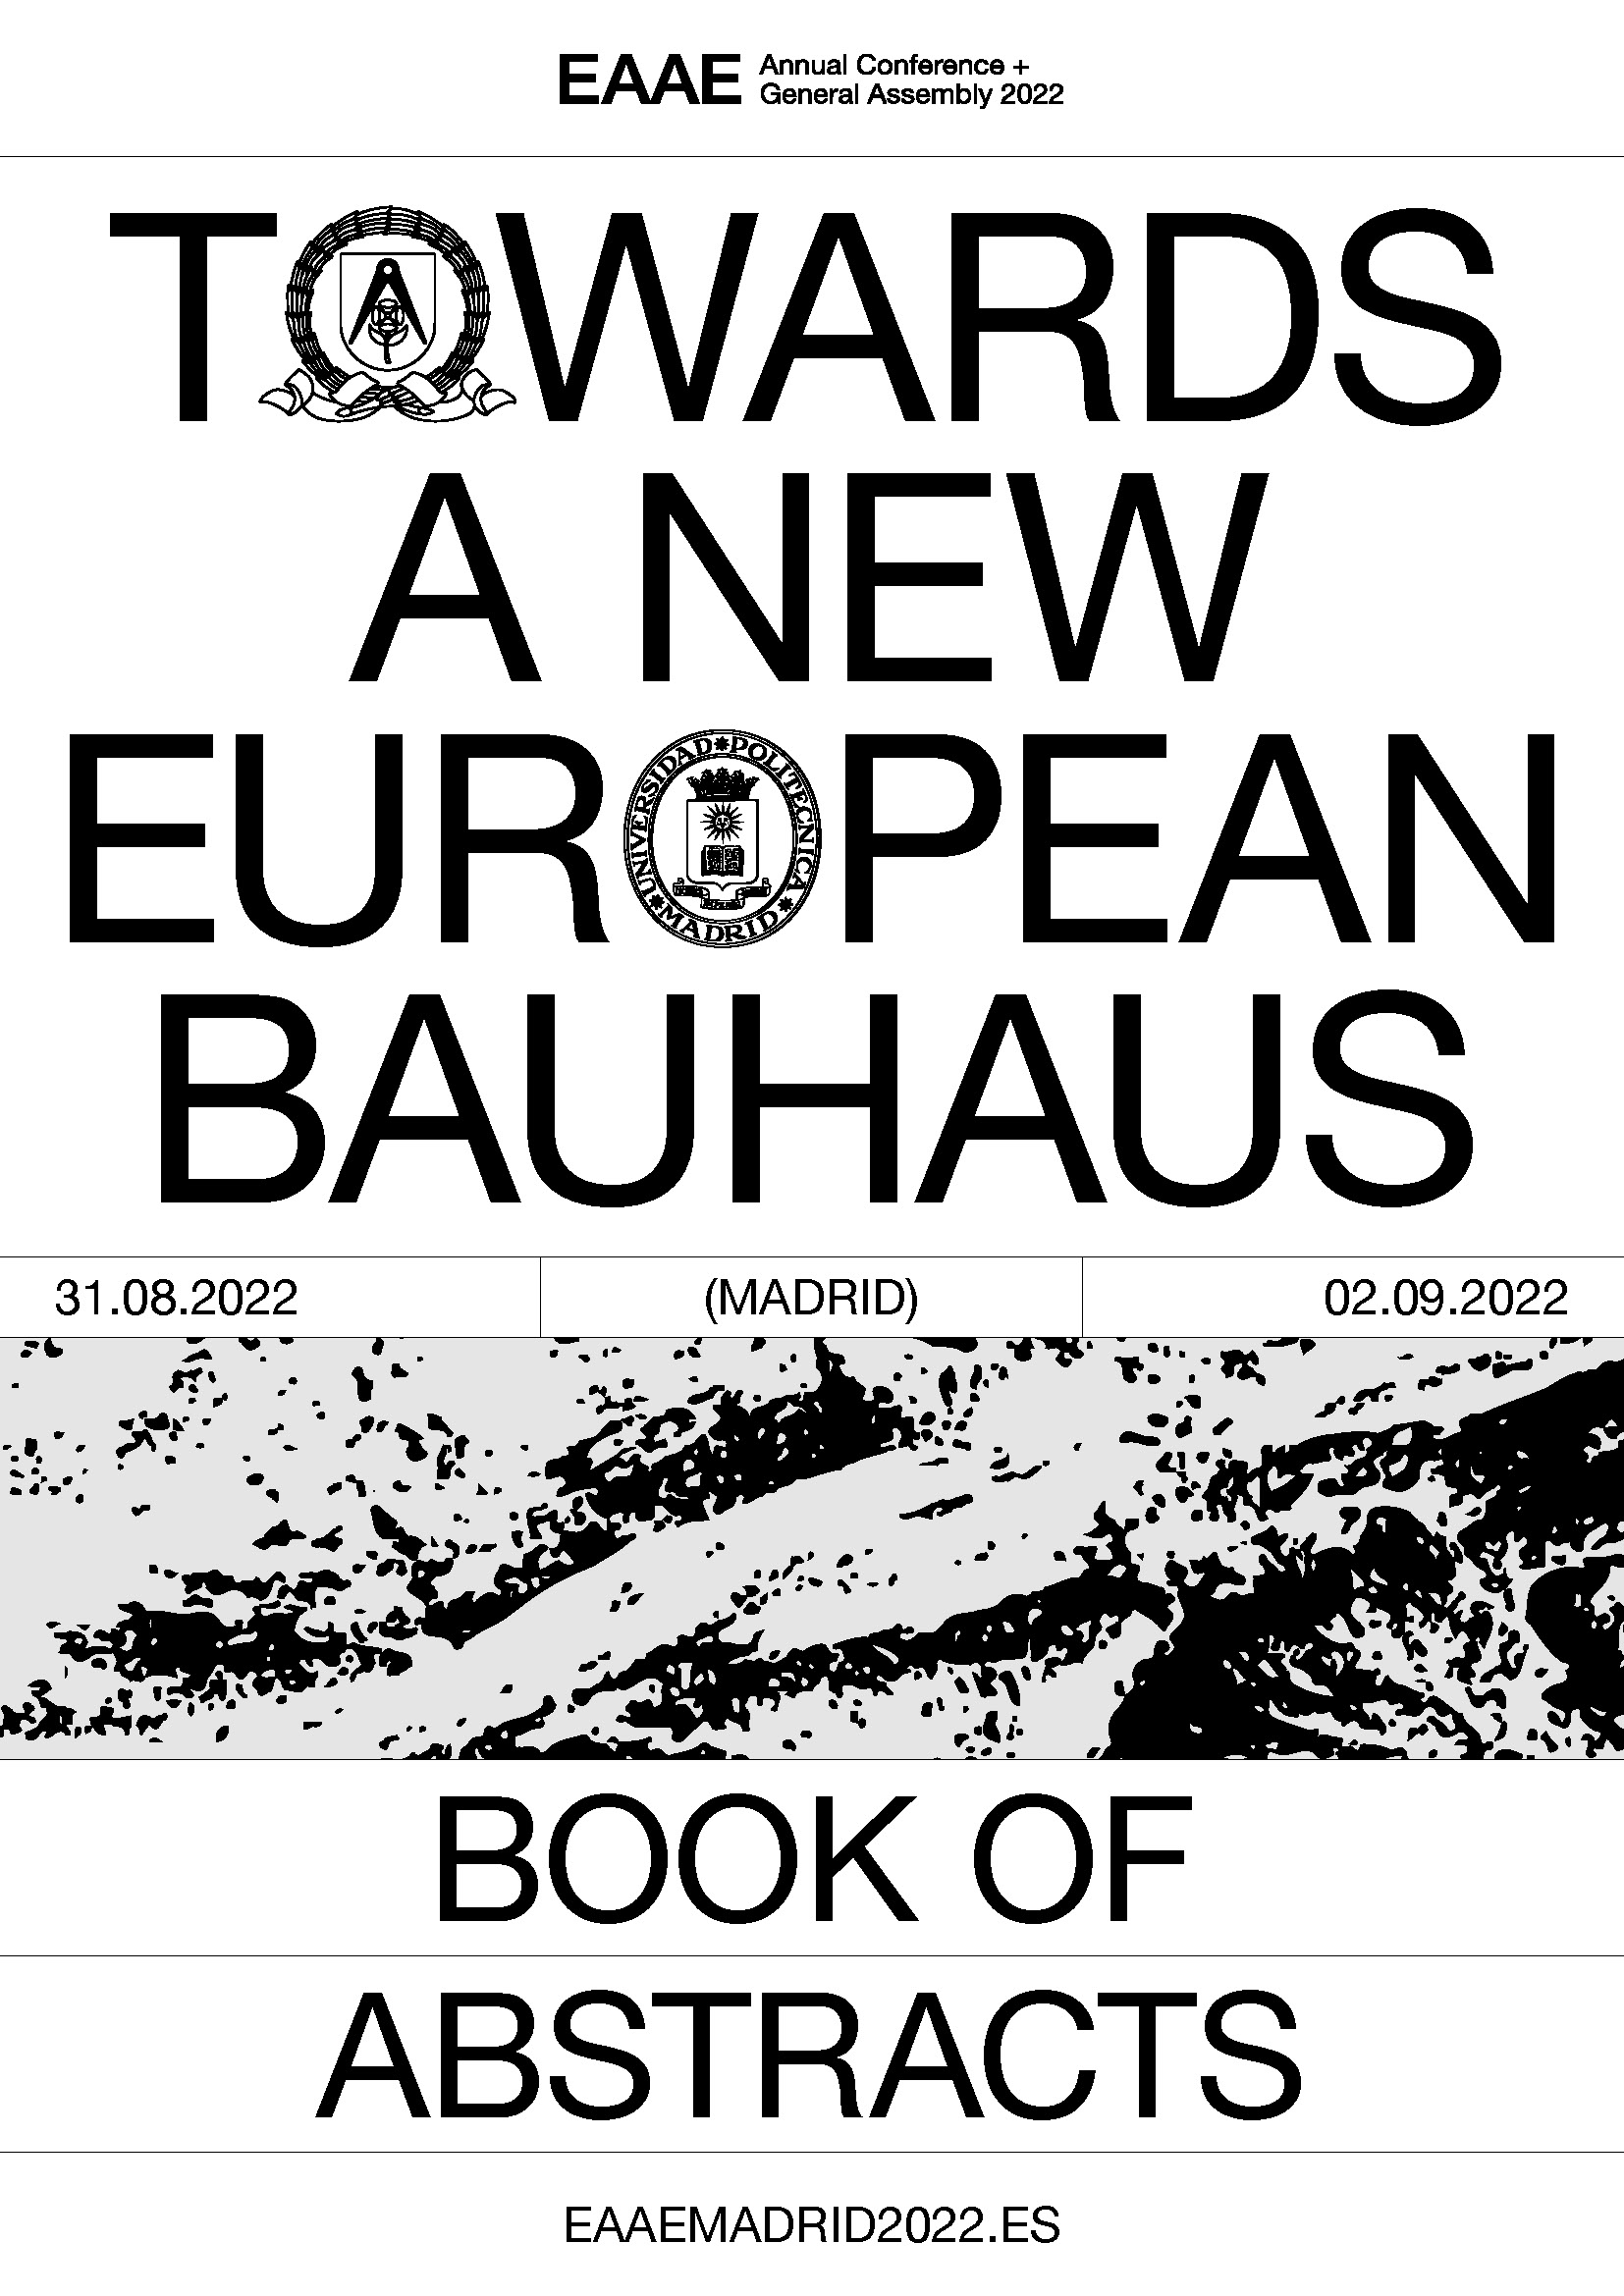 						View 2022: Towards a New European Bauhaus - Book of Abstracts. EAAE Annual Conference Madrid 2022
					